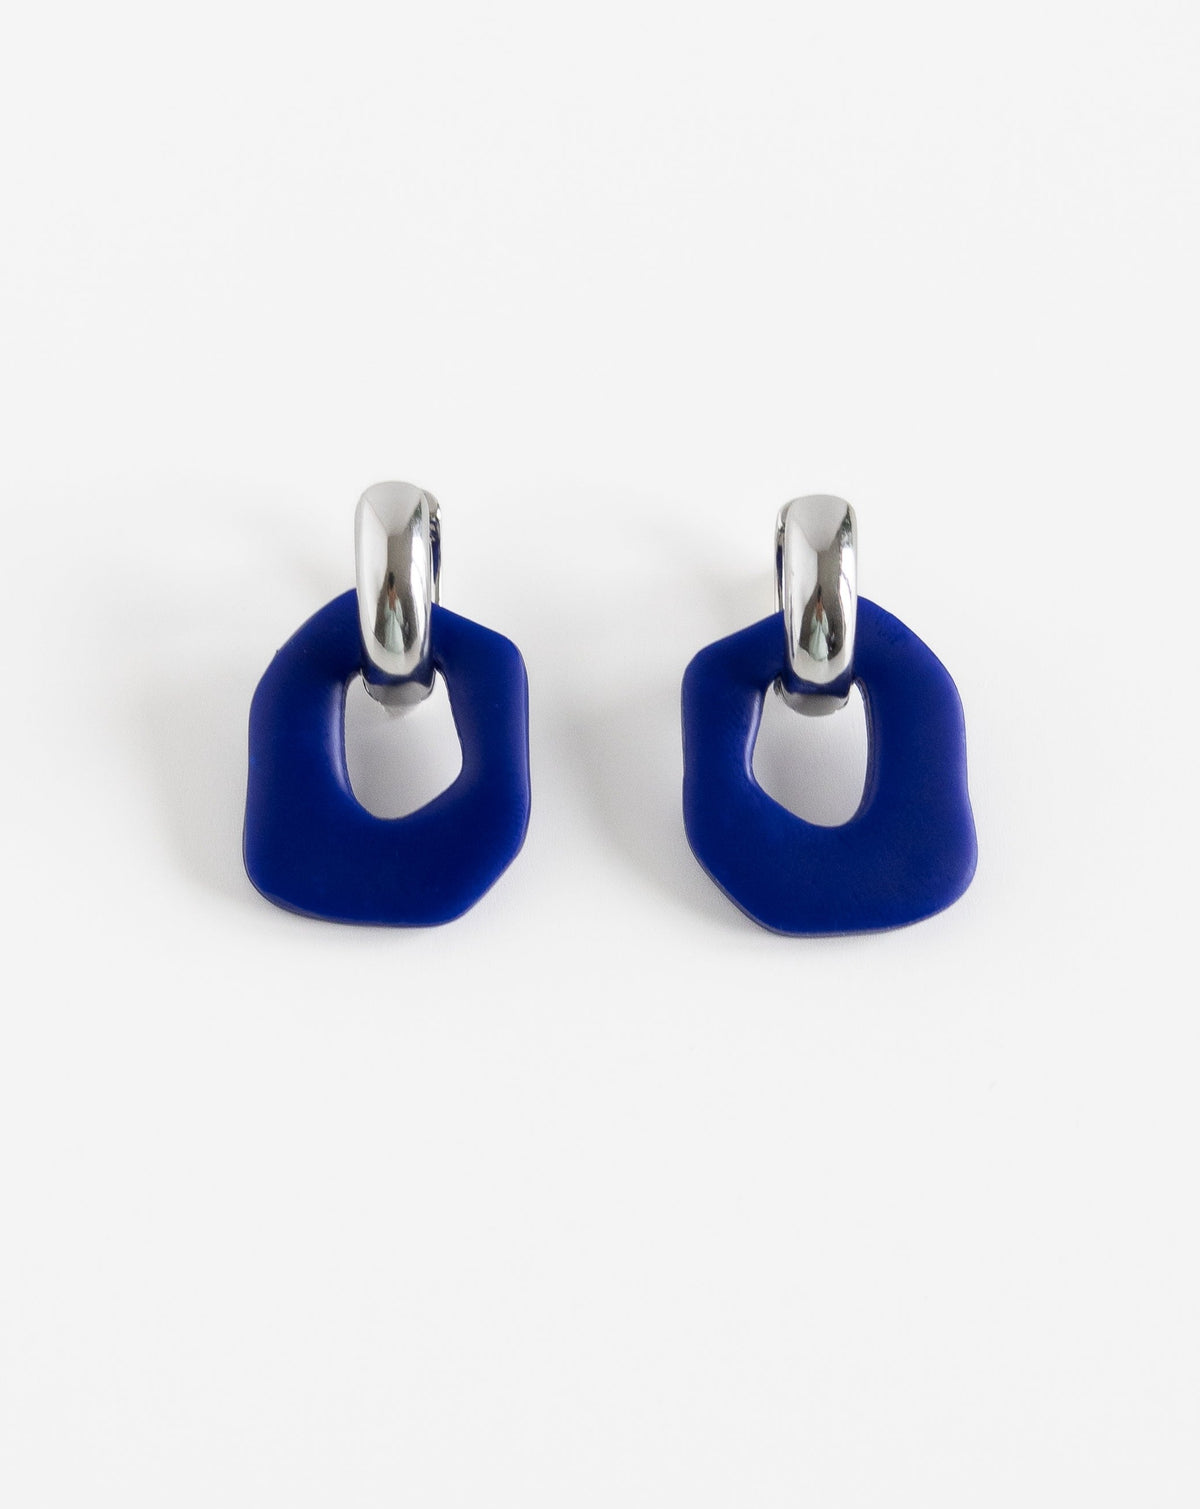 Darien earrings in Hue Blue color with silver hoops, front view